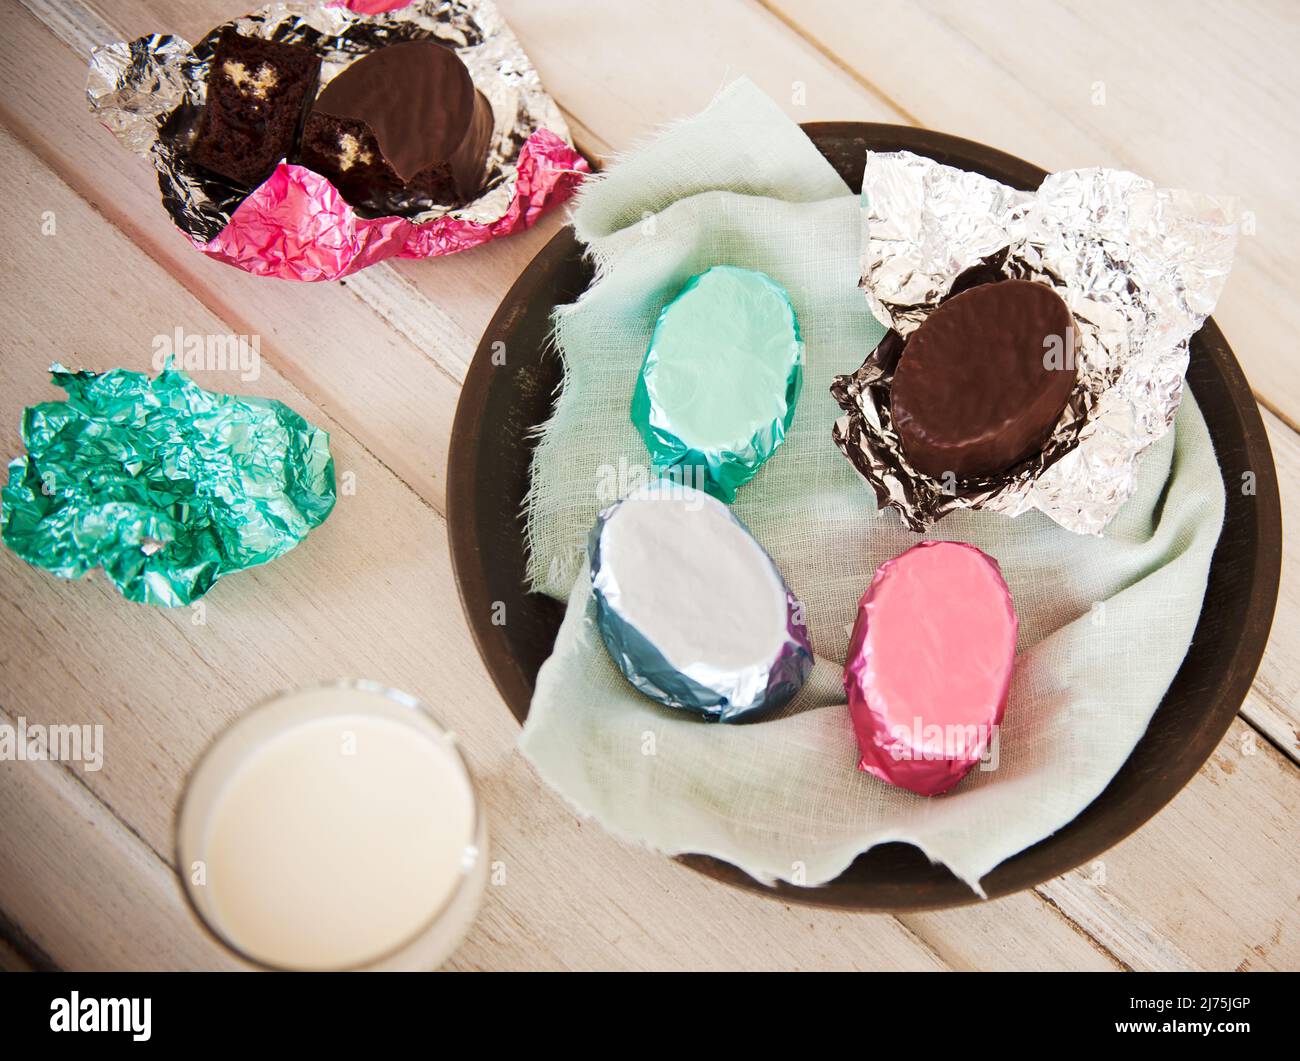 Mini Cream Filled Chocolate Cakes in Colored Foil Wrappers with a Glass of Milk Stock Photo